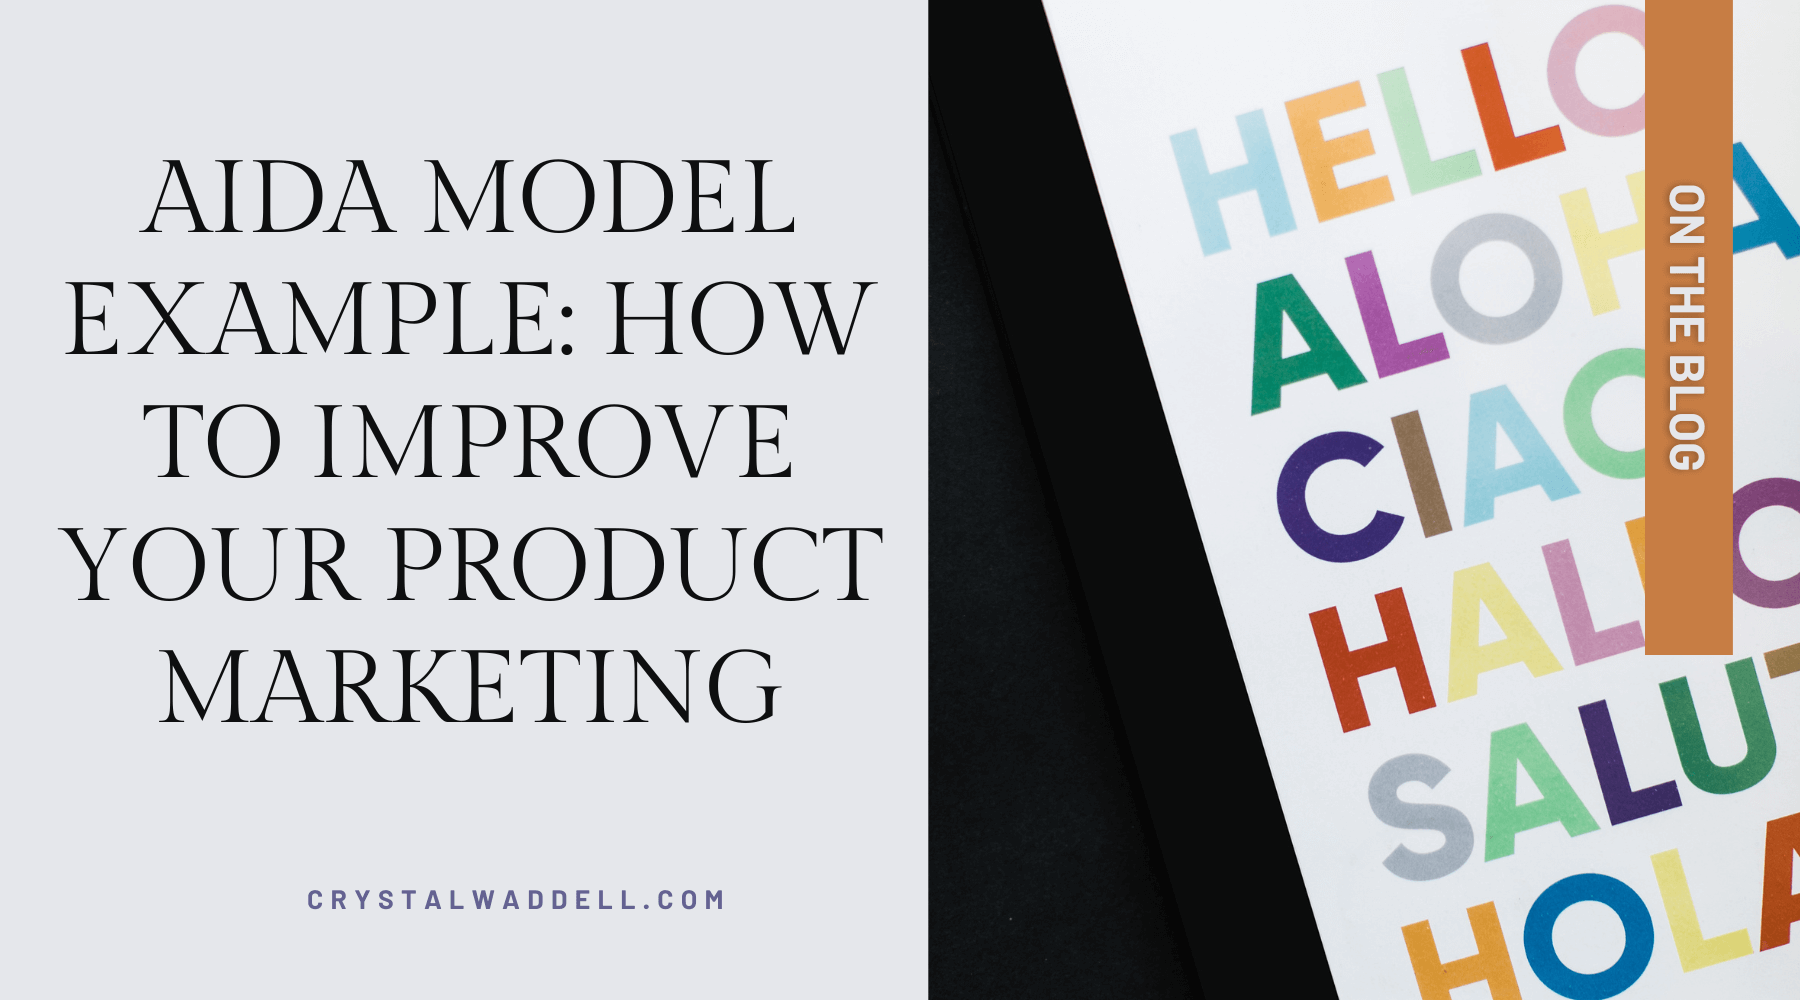 how to improve your product marketing. Step 1 is getting your audience's attention